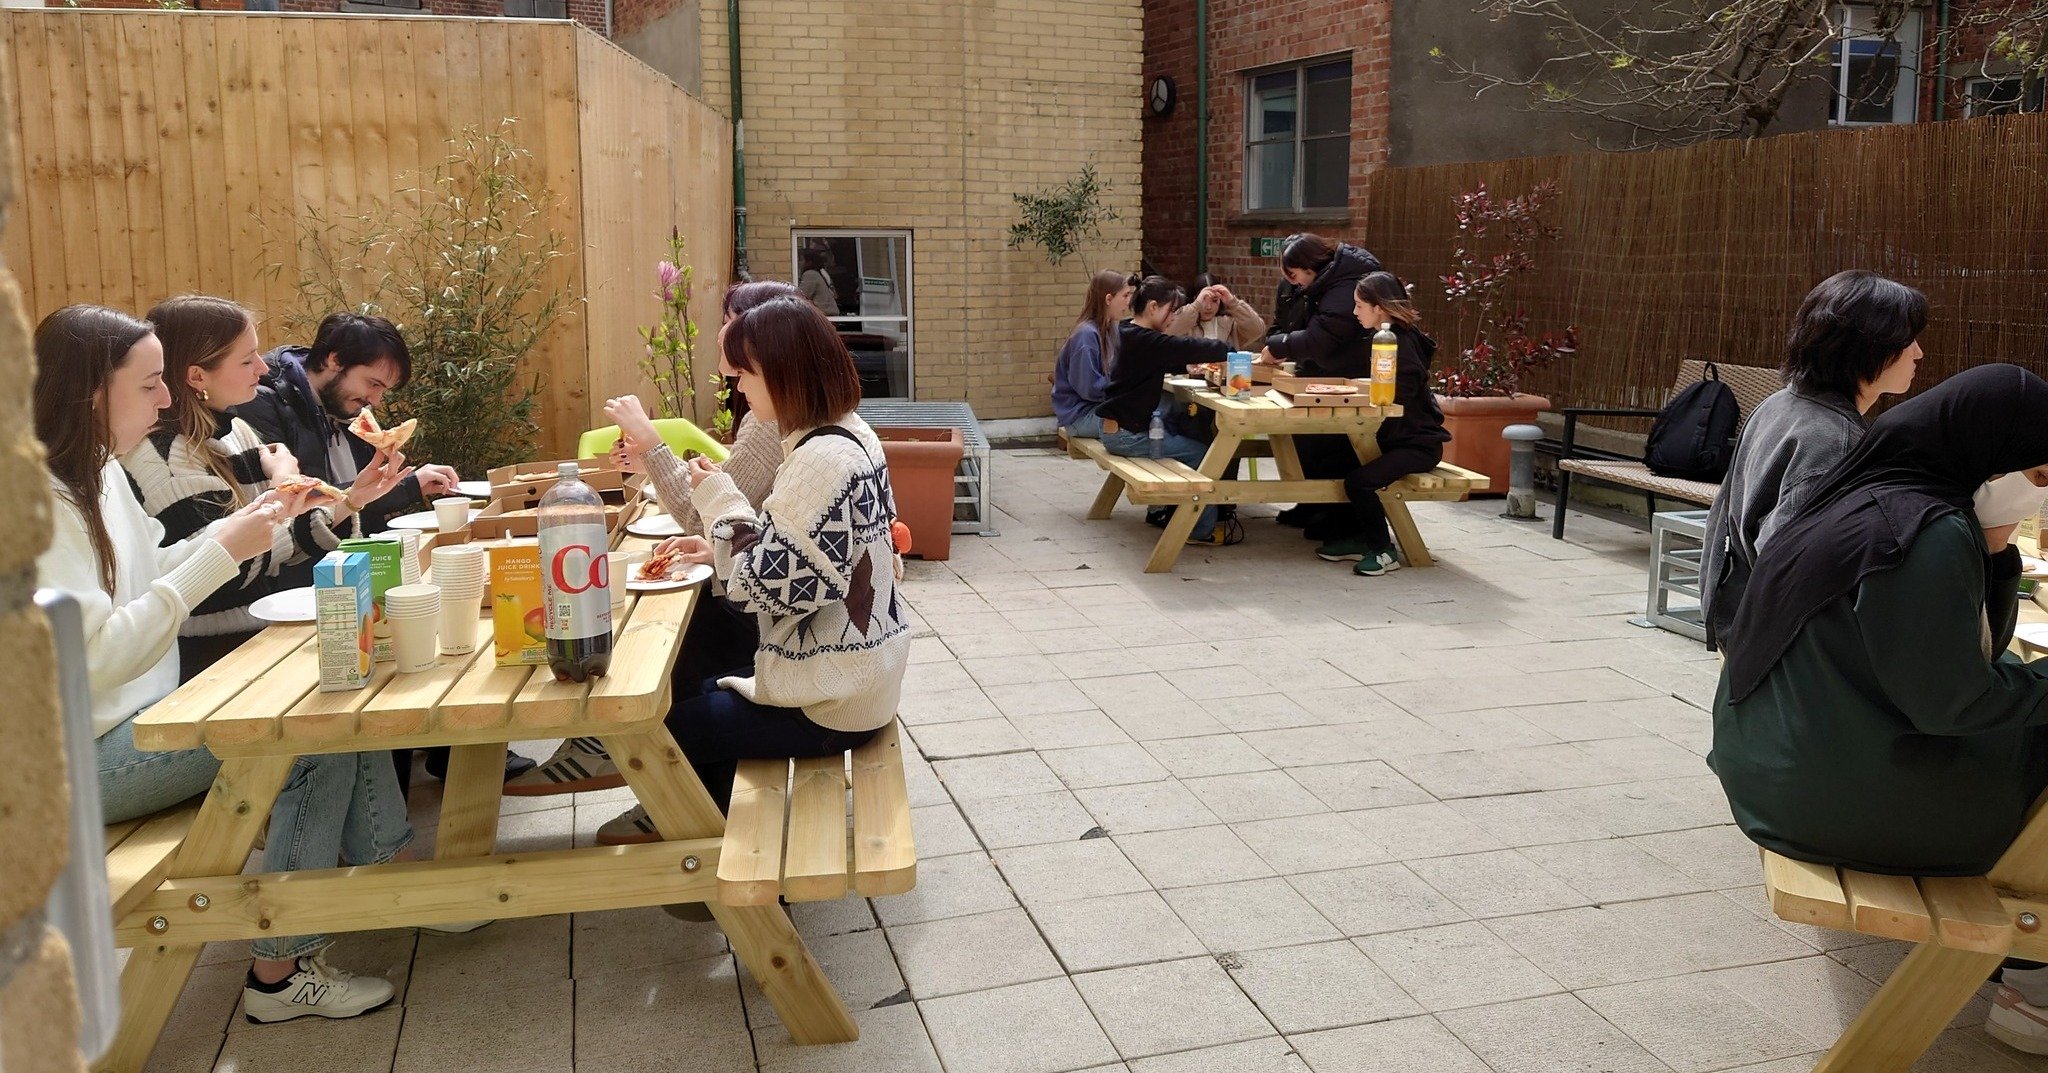 Our students enjoying their pizza lunch on their new terrace☀️

 #studywithus #internationalstudentlife #internationalstudent #unitedkingdom #language #city #englishlanguagecourses #englishlanguage #learnenglishinoxford #EFL #cityofoxford #internatio